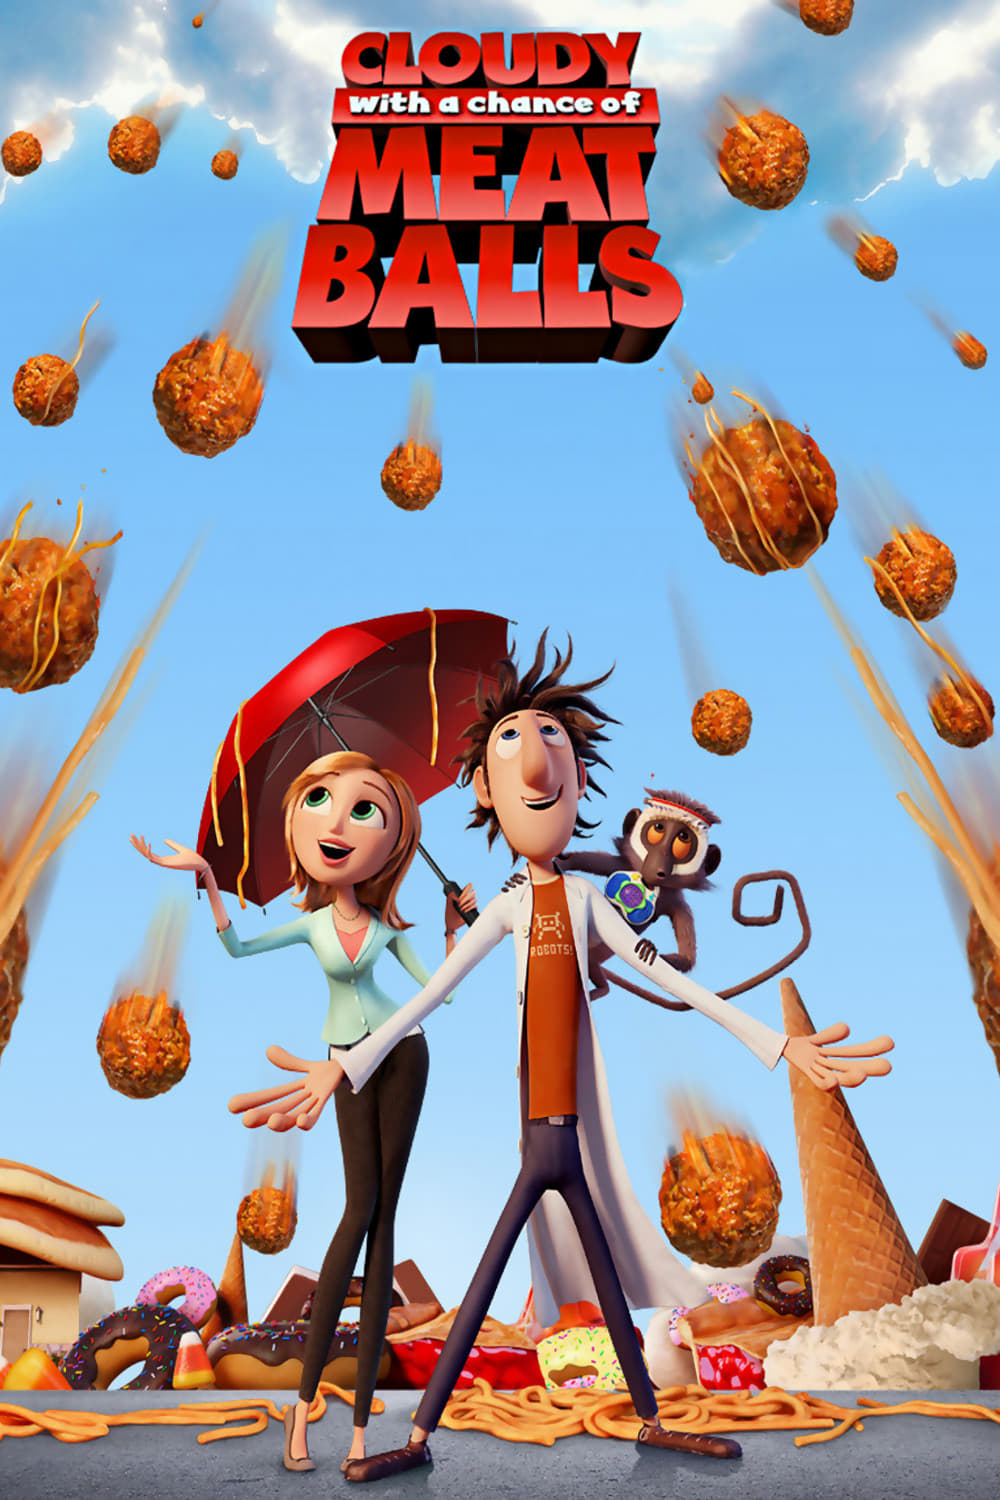 Cloudy with a Chance of Meatballs Images. 